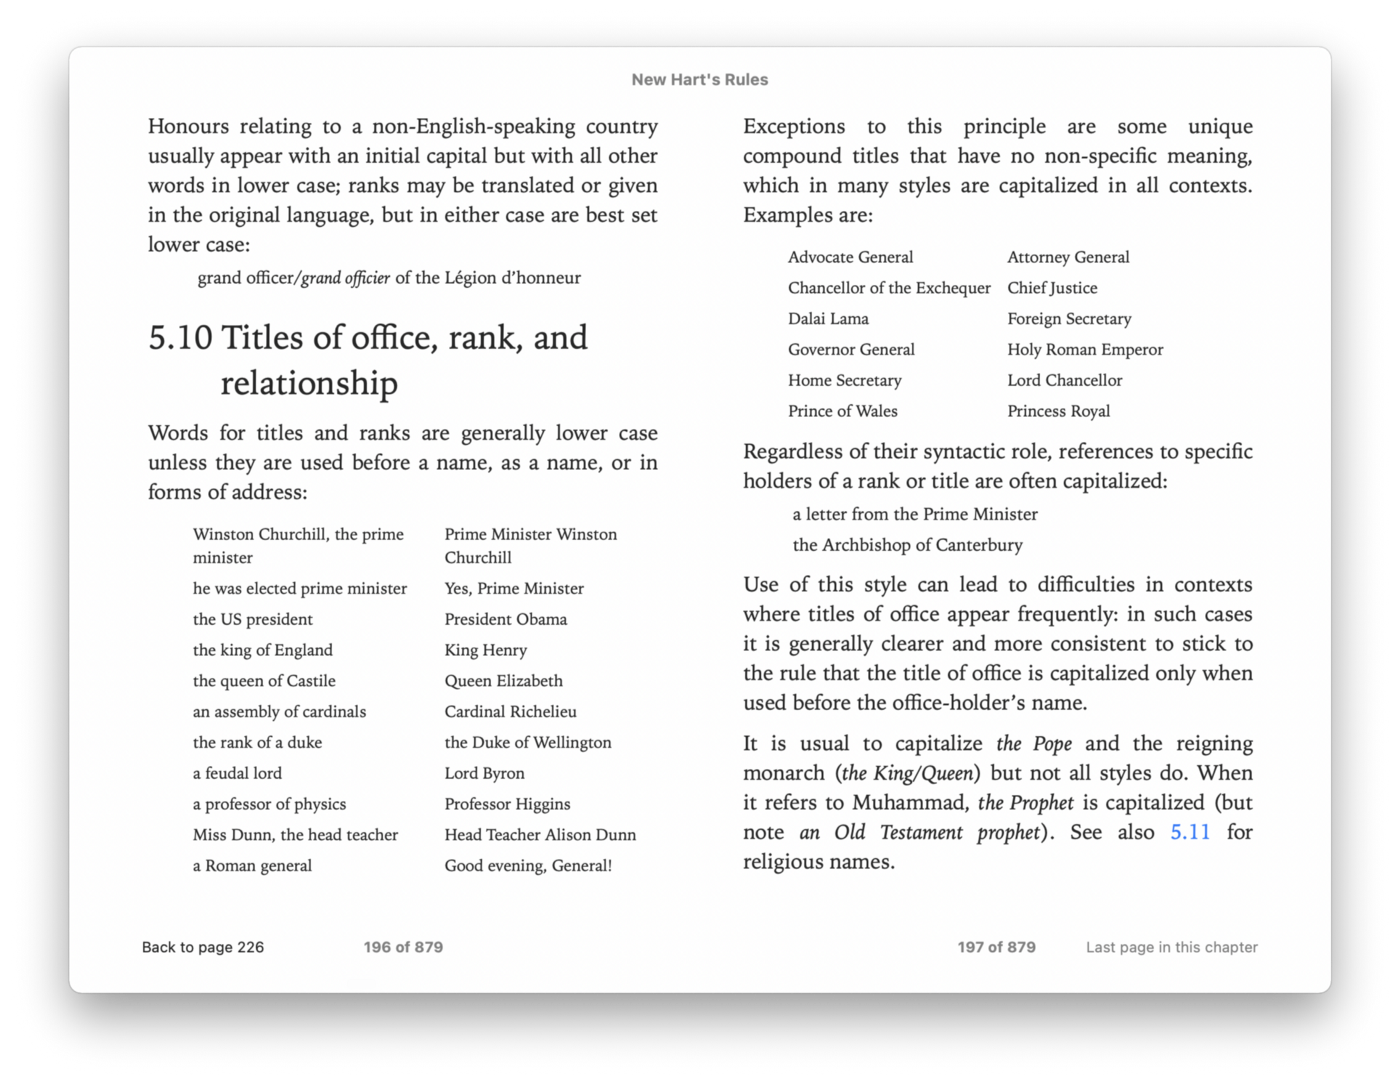 A screen shot from New Hart’s rules on titles of office, rank and relationship.